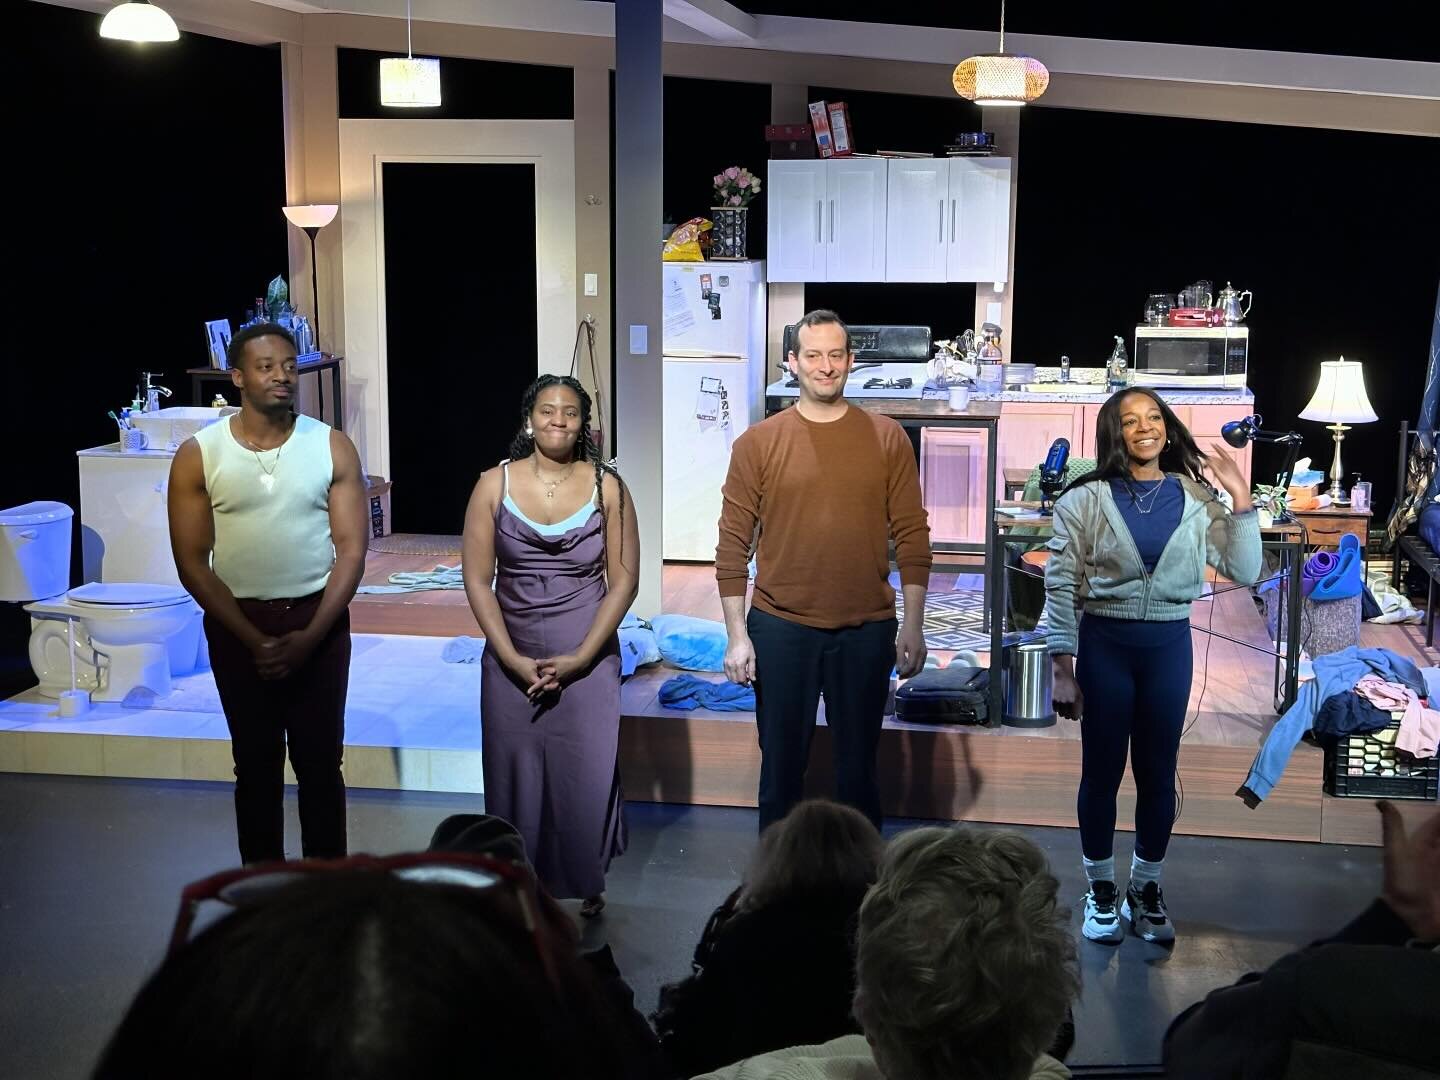 Last Night&rsquo;s @interacttheatreco &lsquo;s production of #StepMomStepMomStepMom is on stage through 2/18. #ShowUp4 #PhillyTheatre